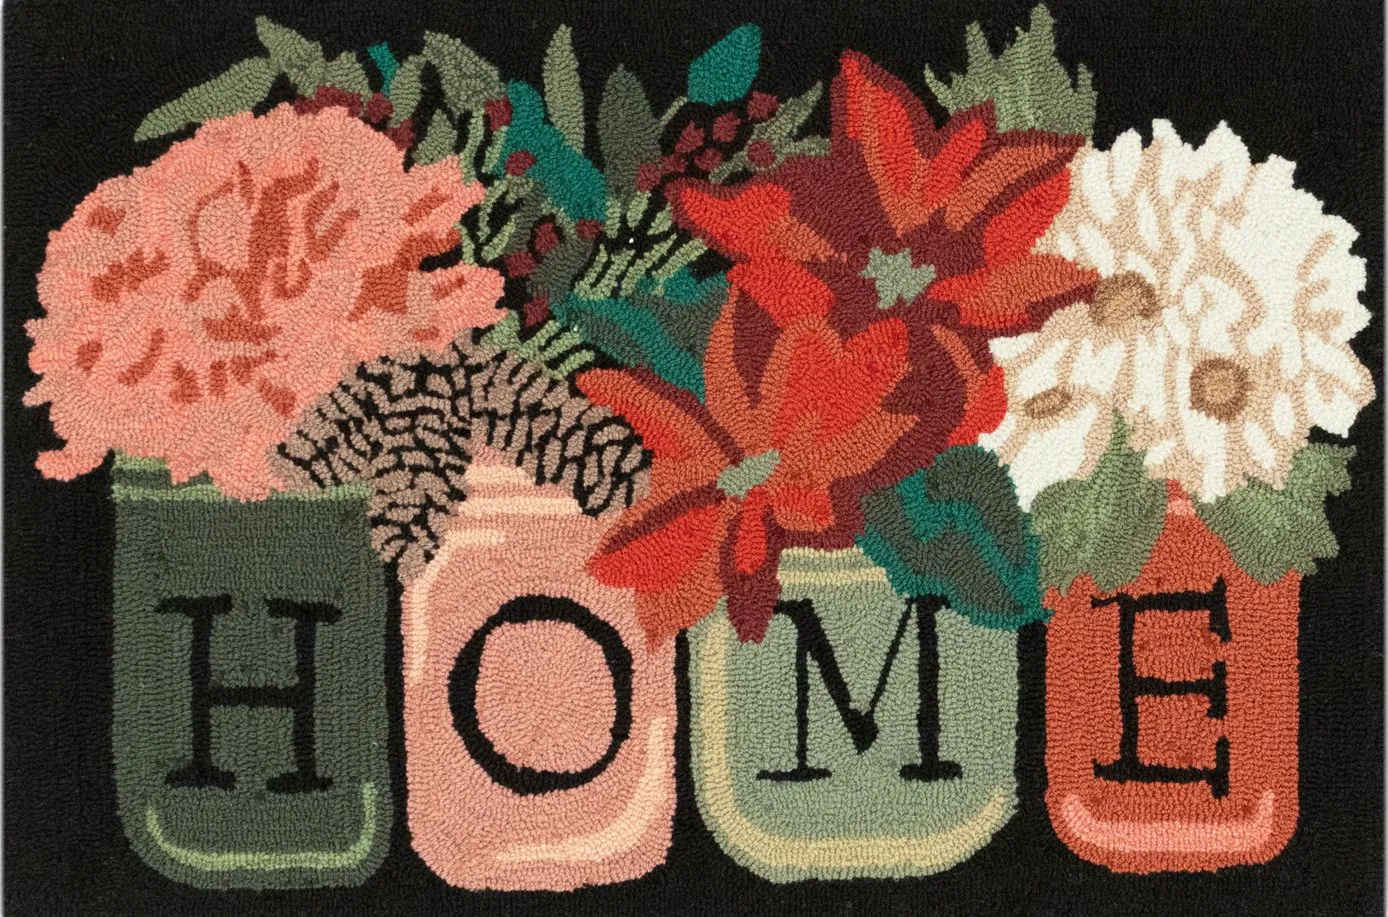 Liora Manne Holiday Home Front Porch Rug in Black by Trans-Ocean Import Co Inc